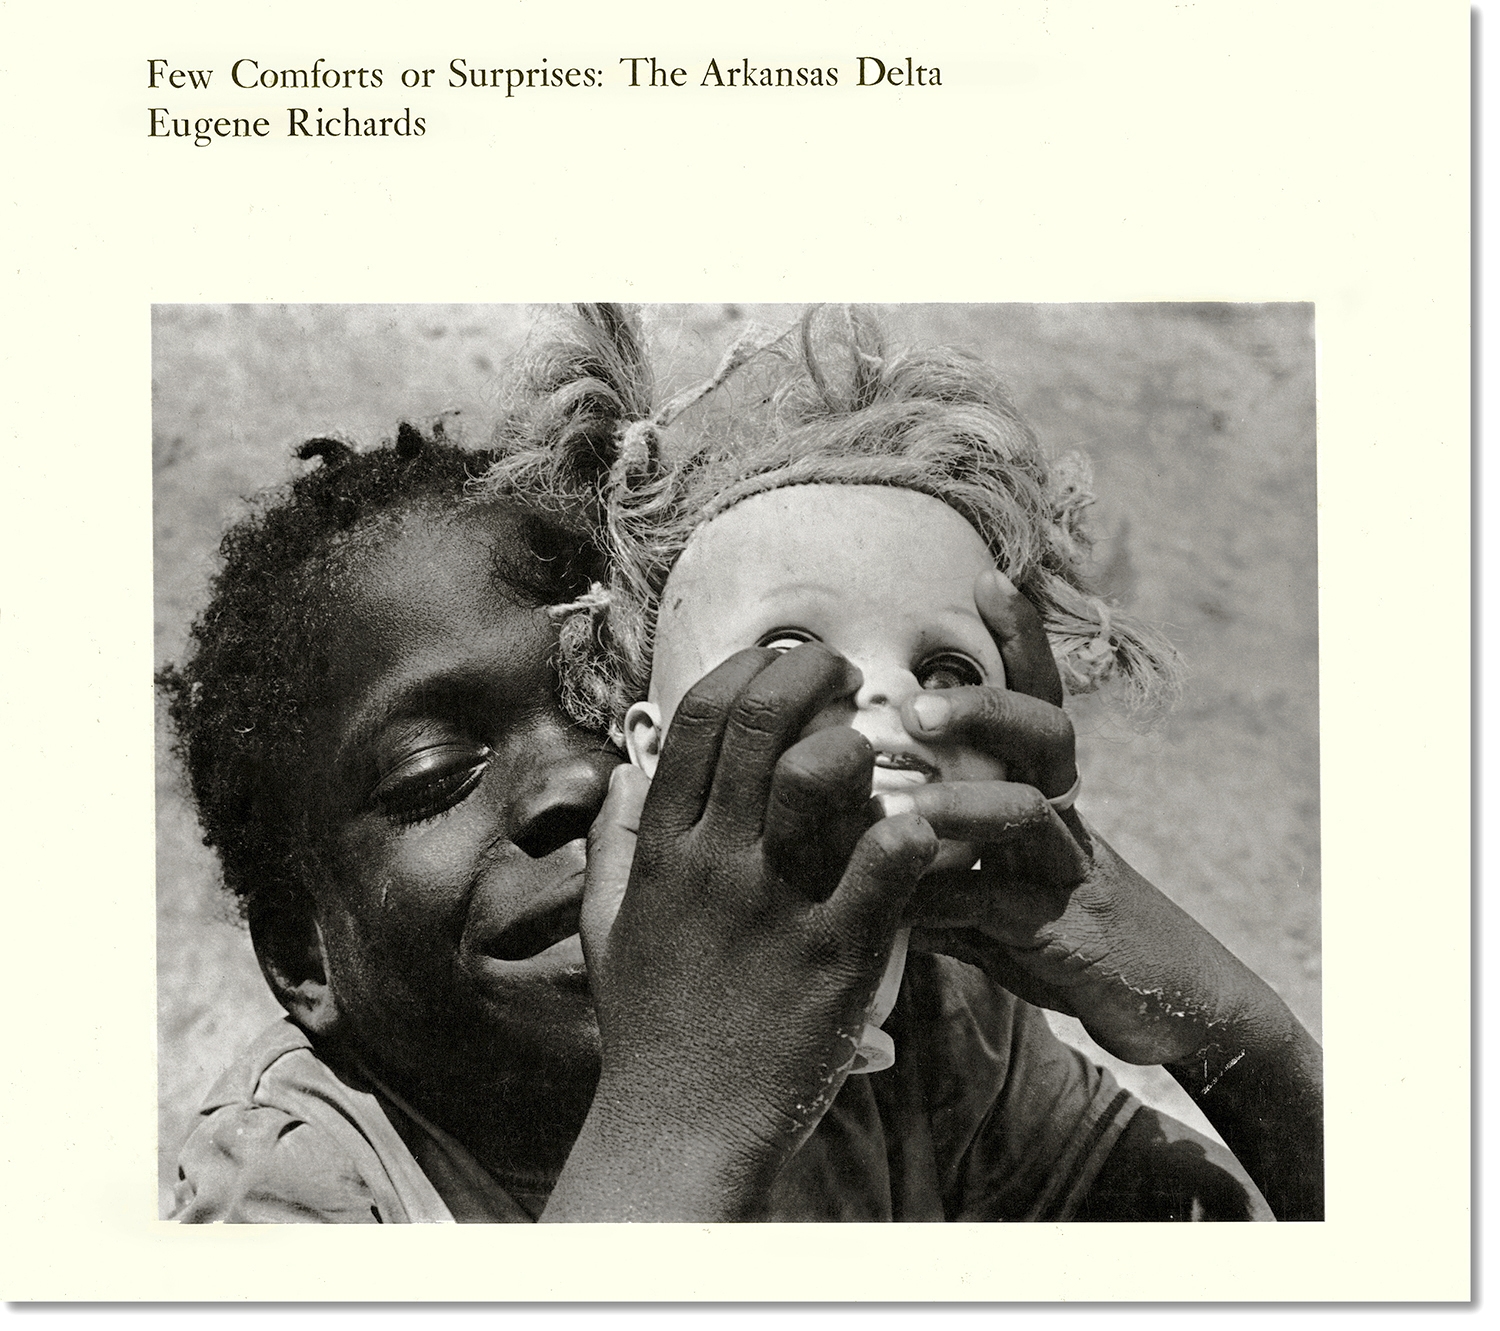  Richards' first book,   Few Comforts or Surprises: The Arkansas Delta  &nbsp;is a documentation of life in the impoverished and racially troubled South. MIT Press, 1973 